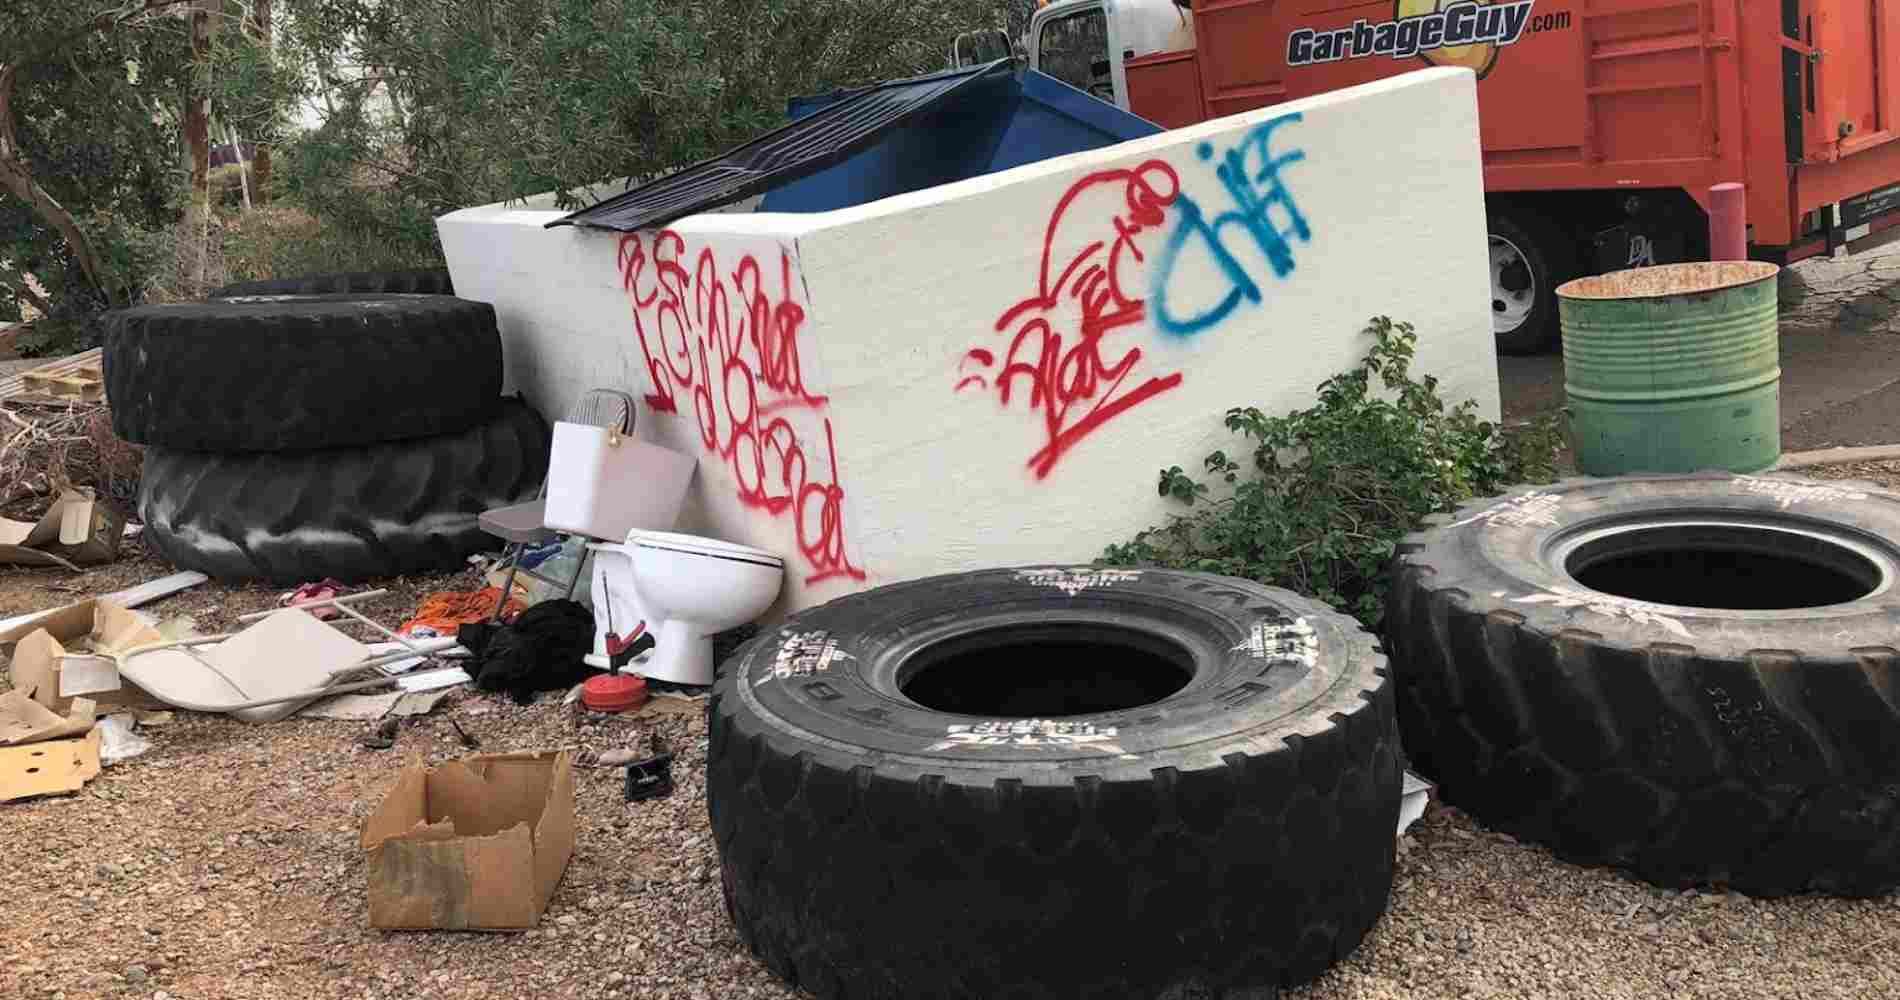 #1 for Tire Disposal in Gilbert, AZ with Over 1200 5-Star Reviews!